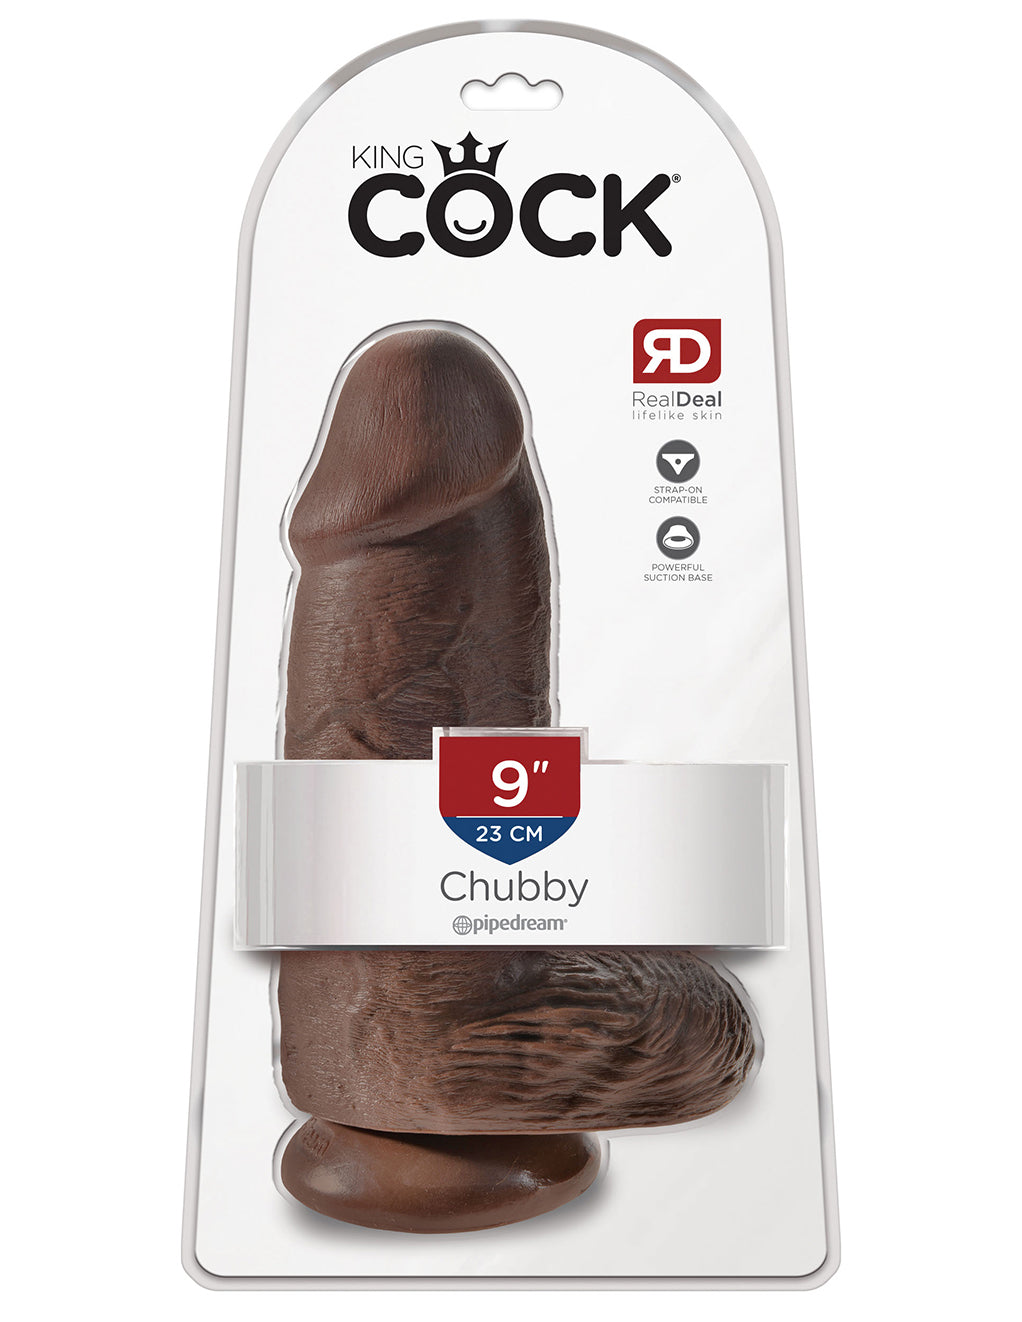 King Cock 9 Inch Chubby Suction Cup Dildo Novelties at Hustler Hollywood